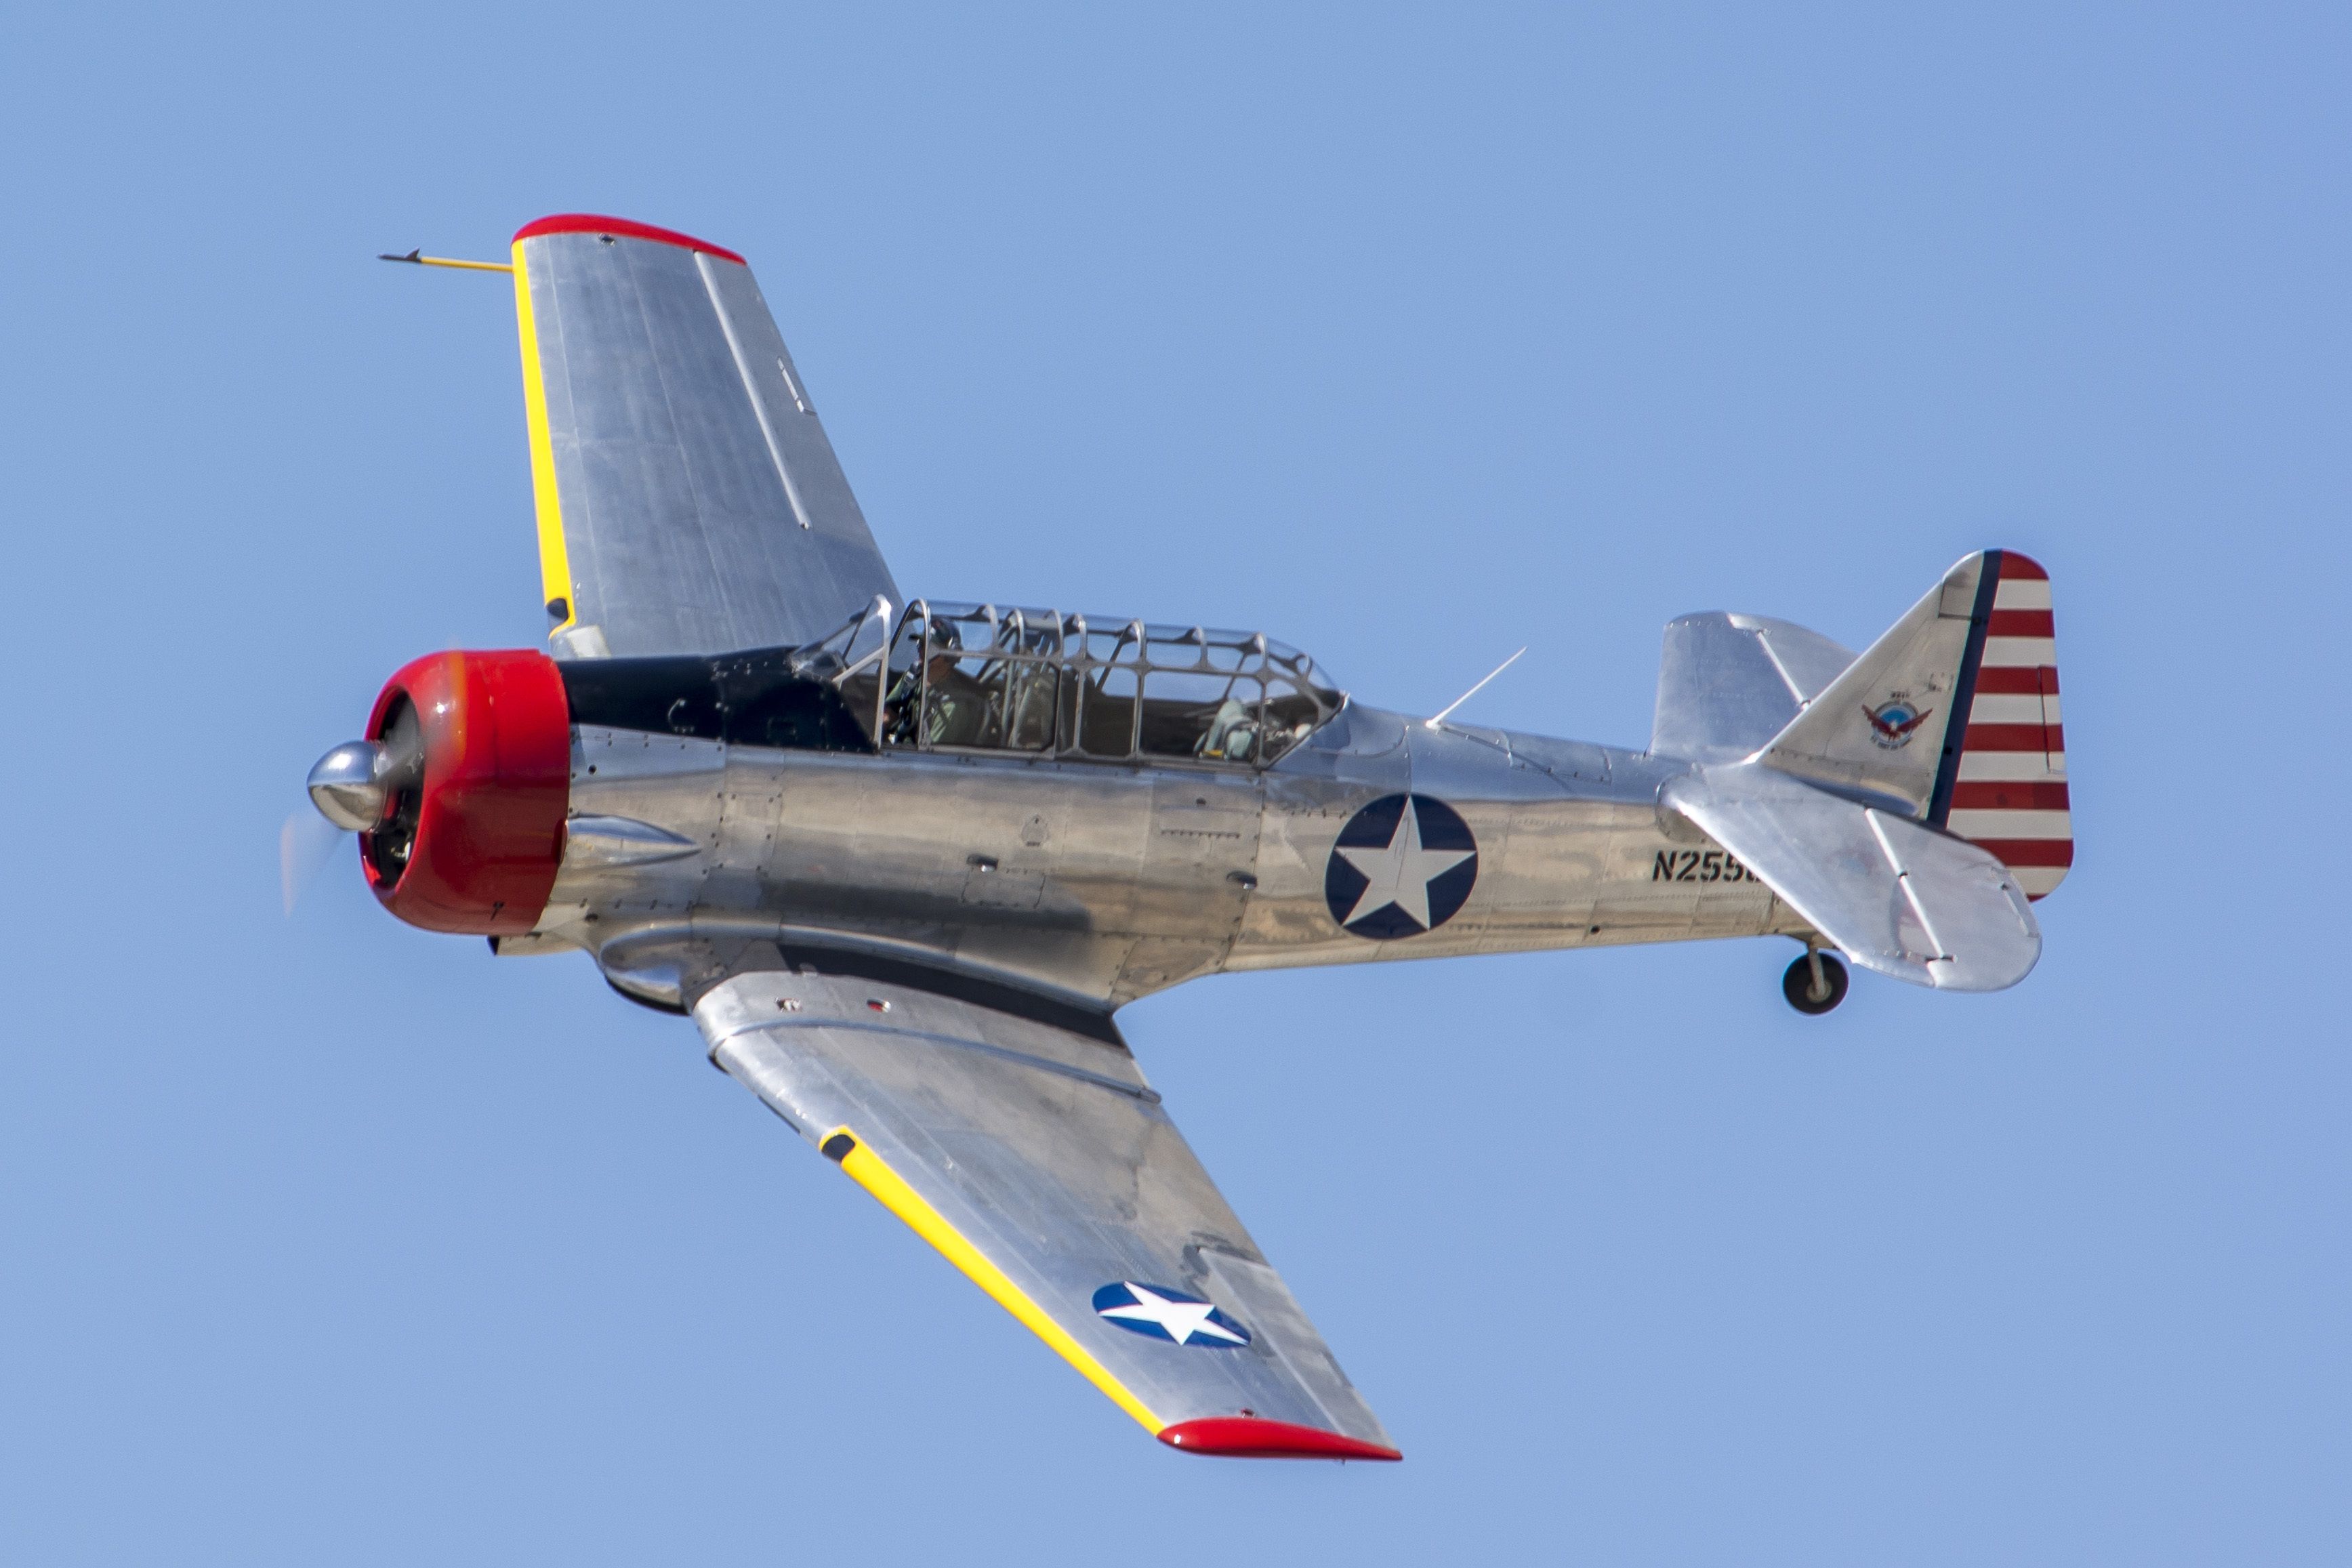 A North American T-6 Texan flying in the sky.